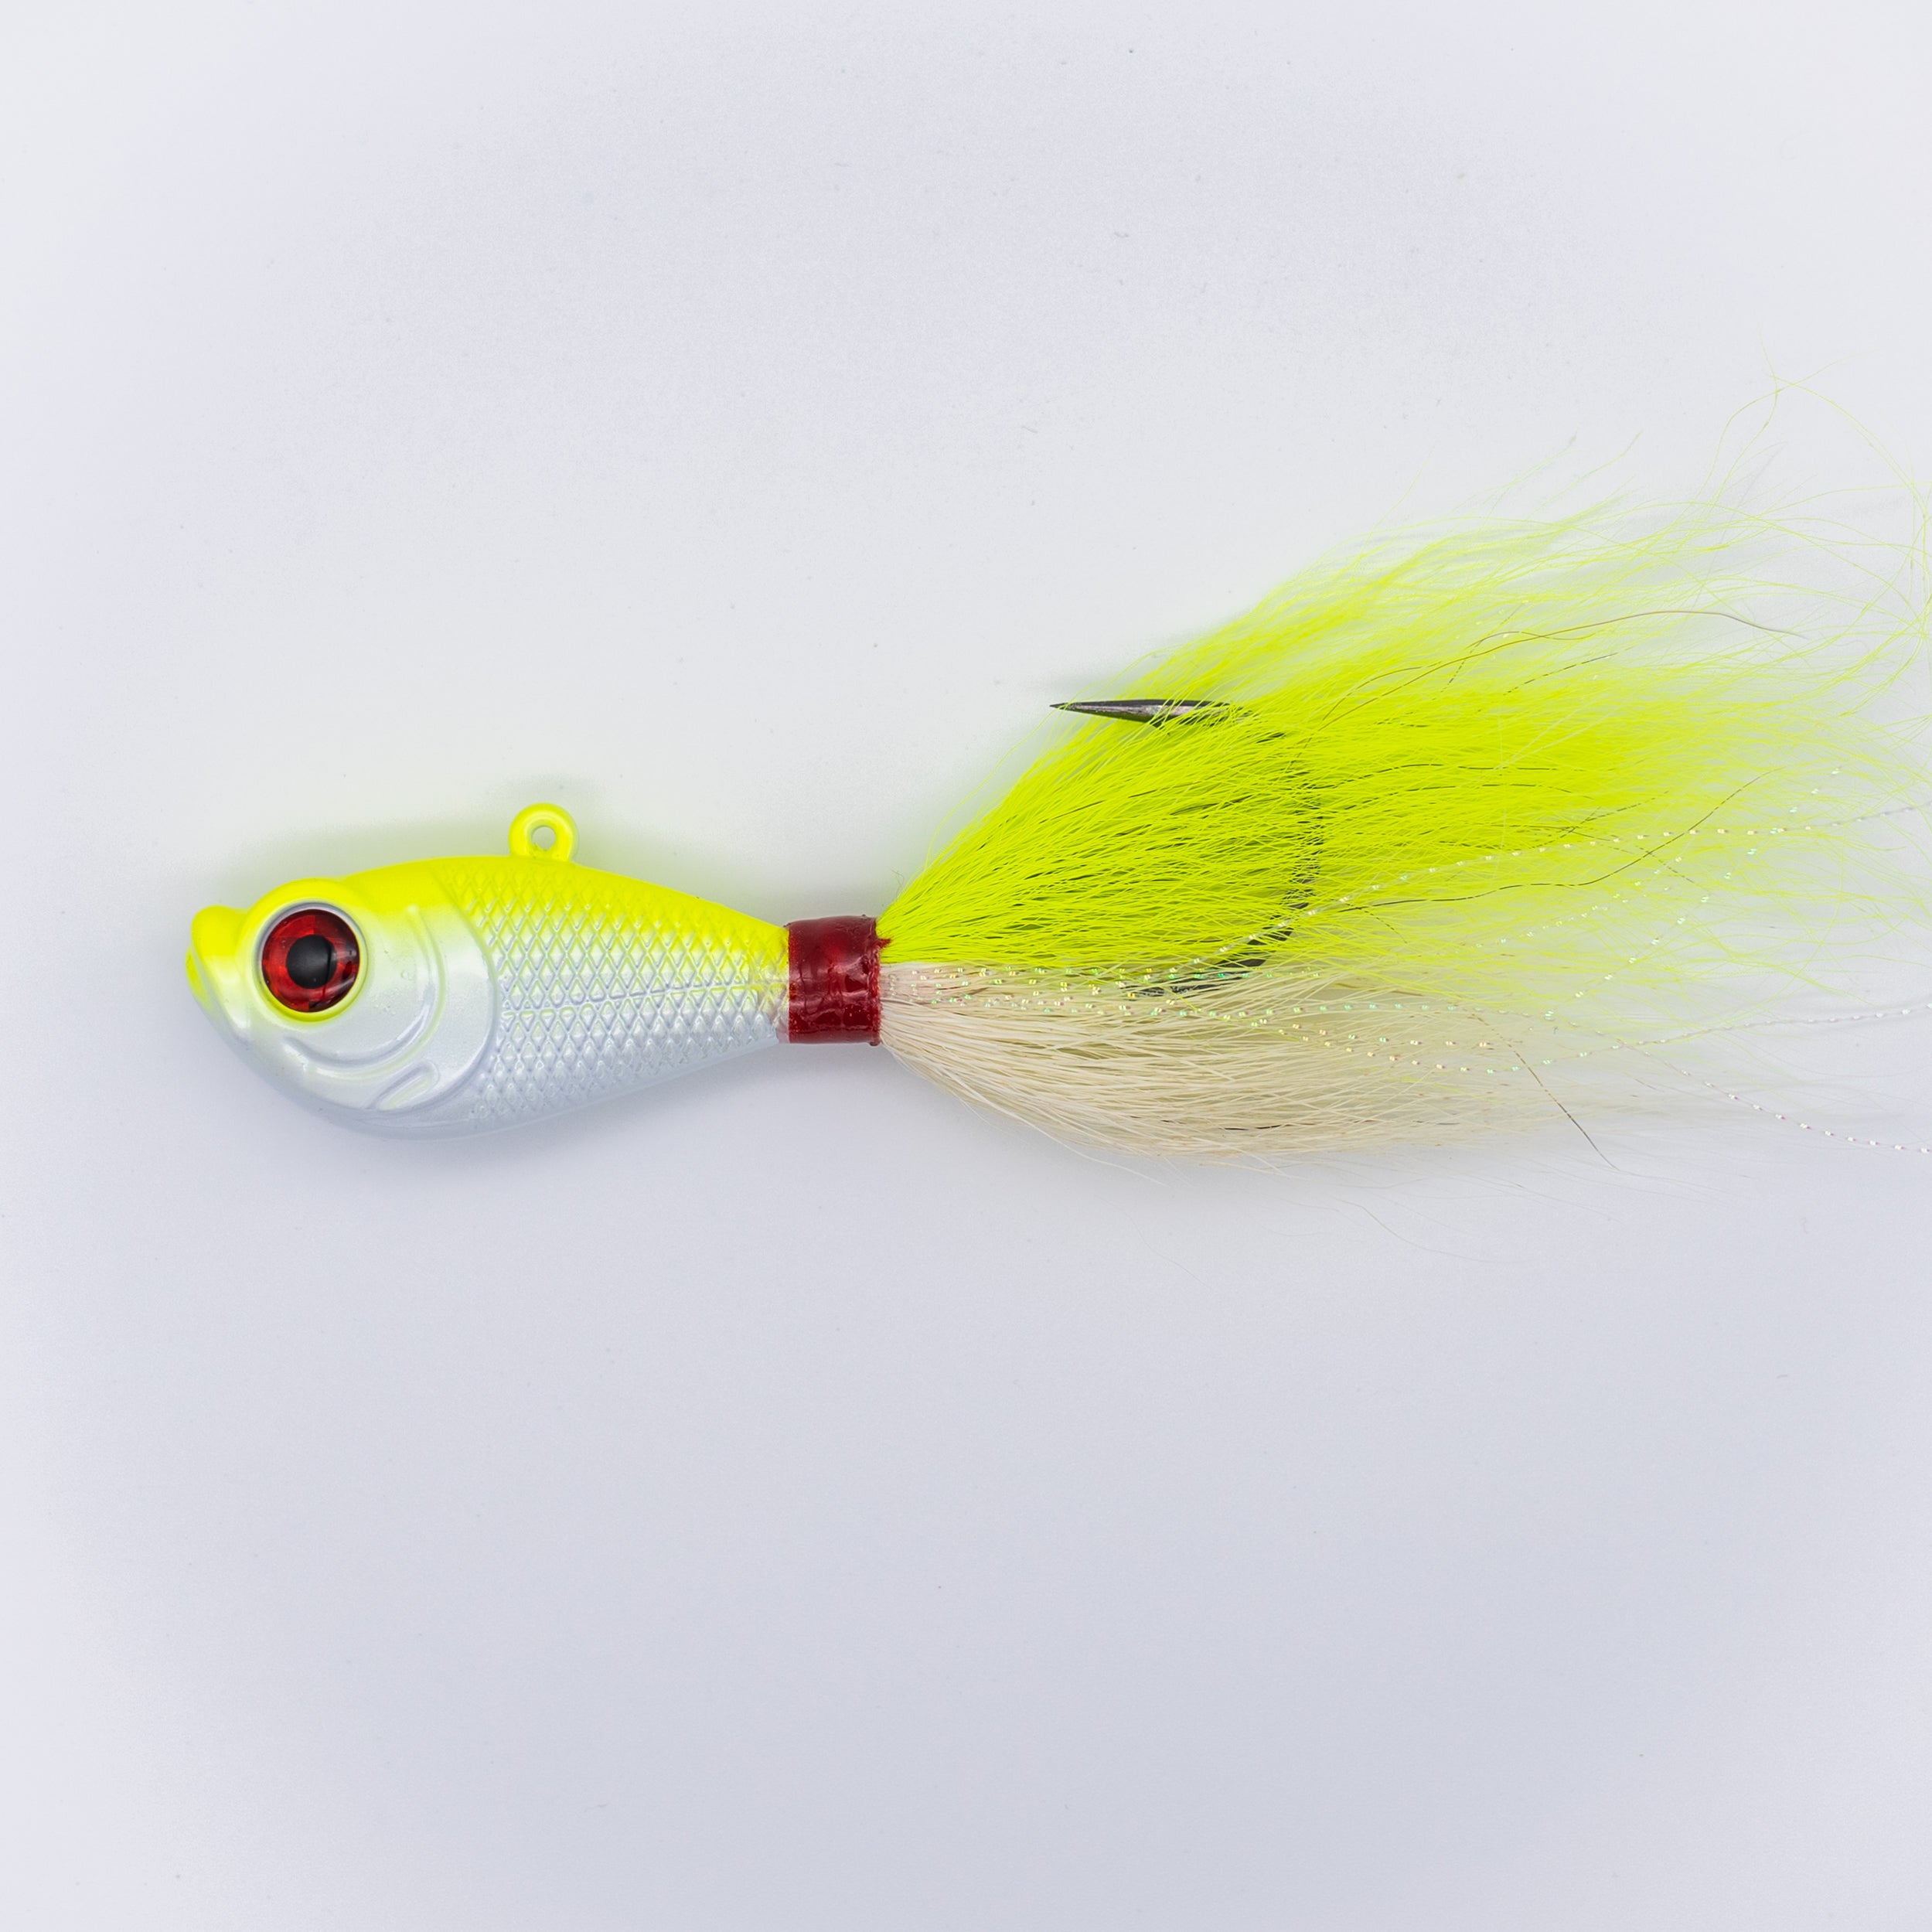 bucktail teaser, bucktail teaser Suppliers and Manufacturers at